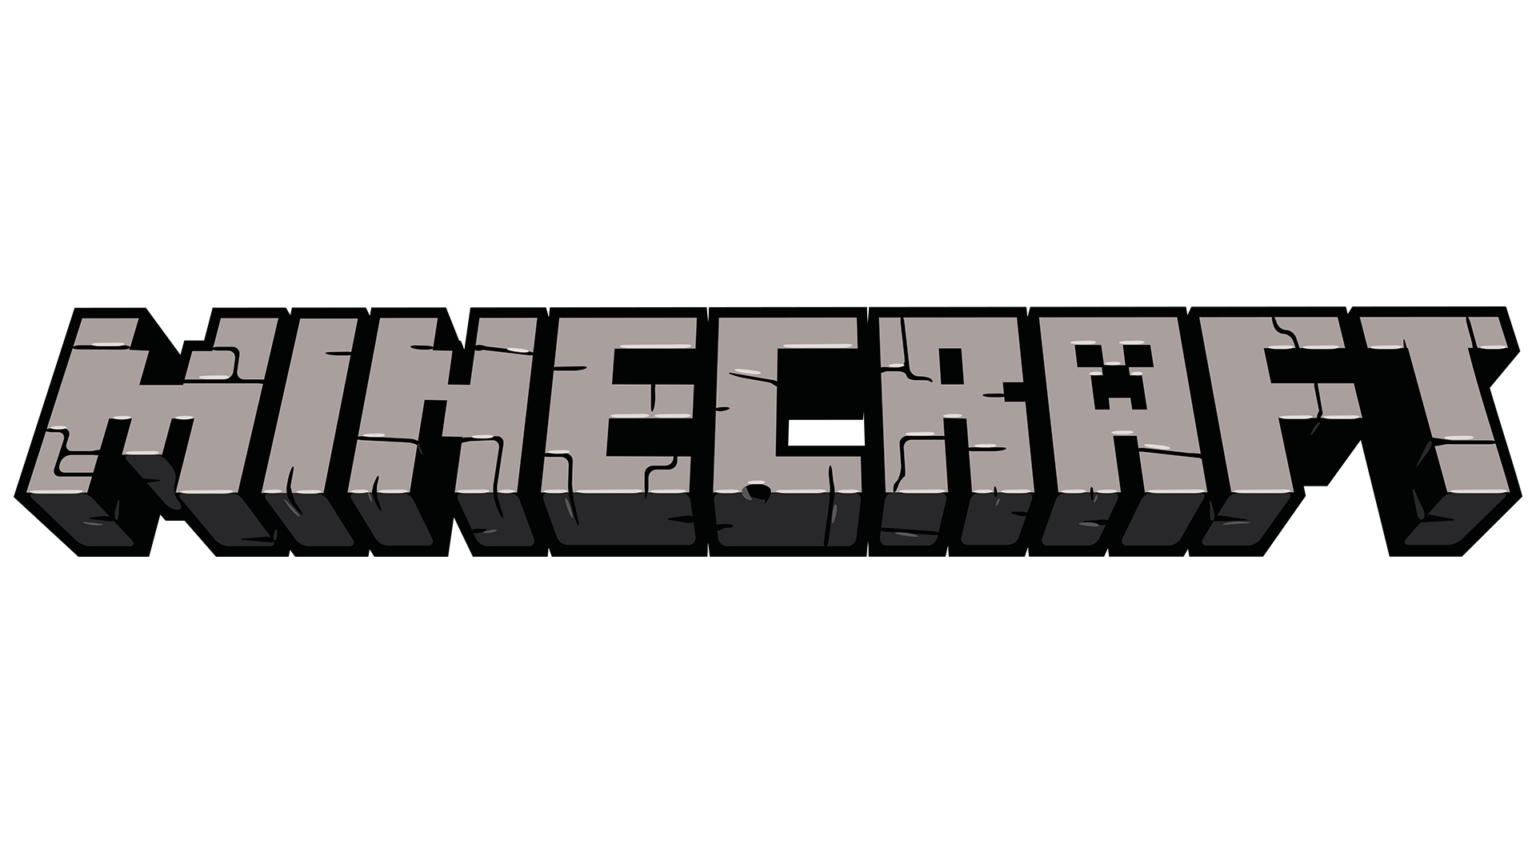 Minecraft and Other 8-Bit Fonts for Retro Fans | HipFonts